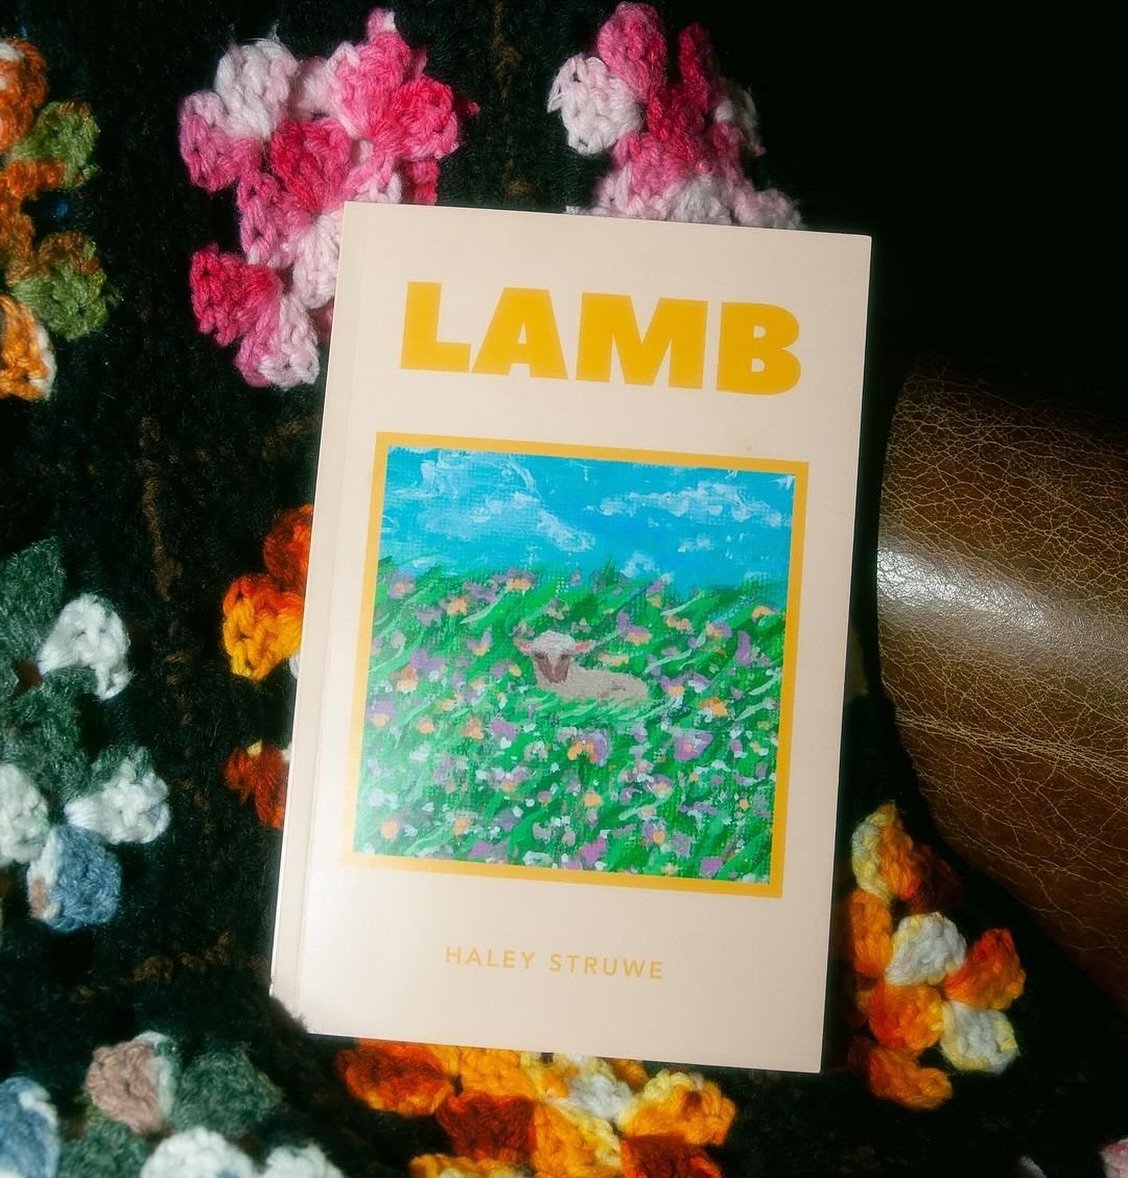 Introducing &lsquo;Lamb&rsquo; by Haley Struwe, an incredible print project from our Publishing Program 🐑 

Haley Struwe&rsquo;s poetry debut is a fearlessly honest examination of the non place between ending and beginning, and an exploration of the